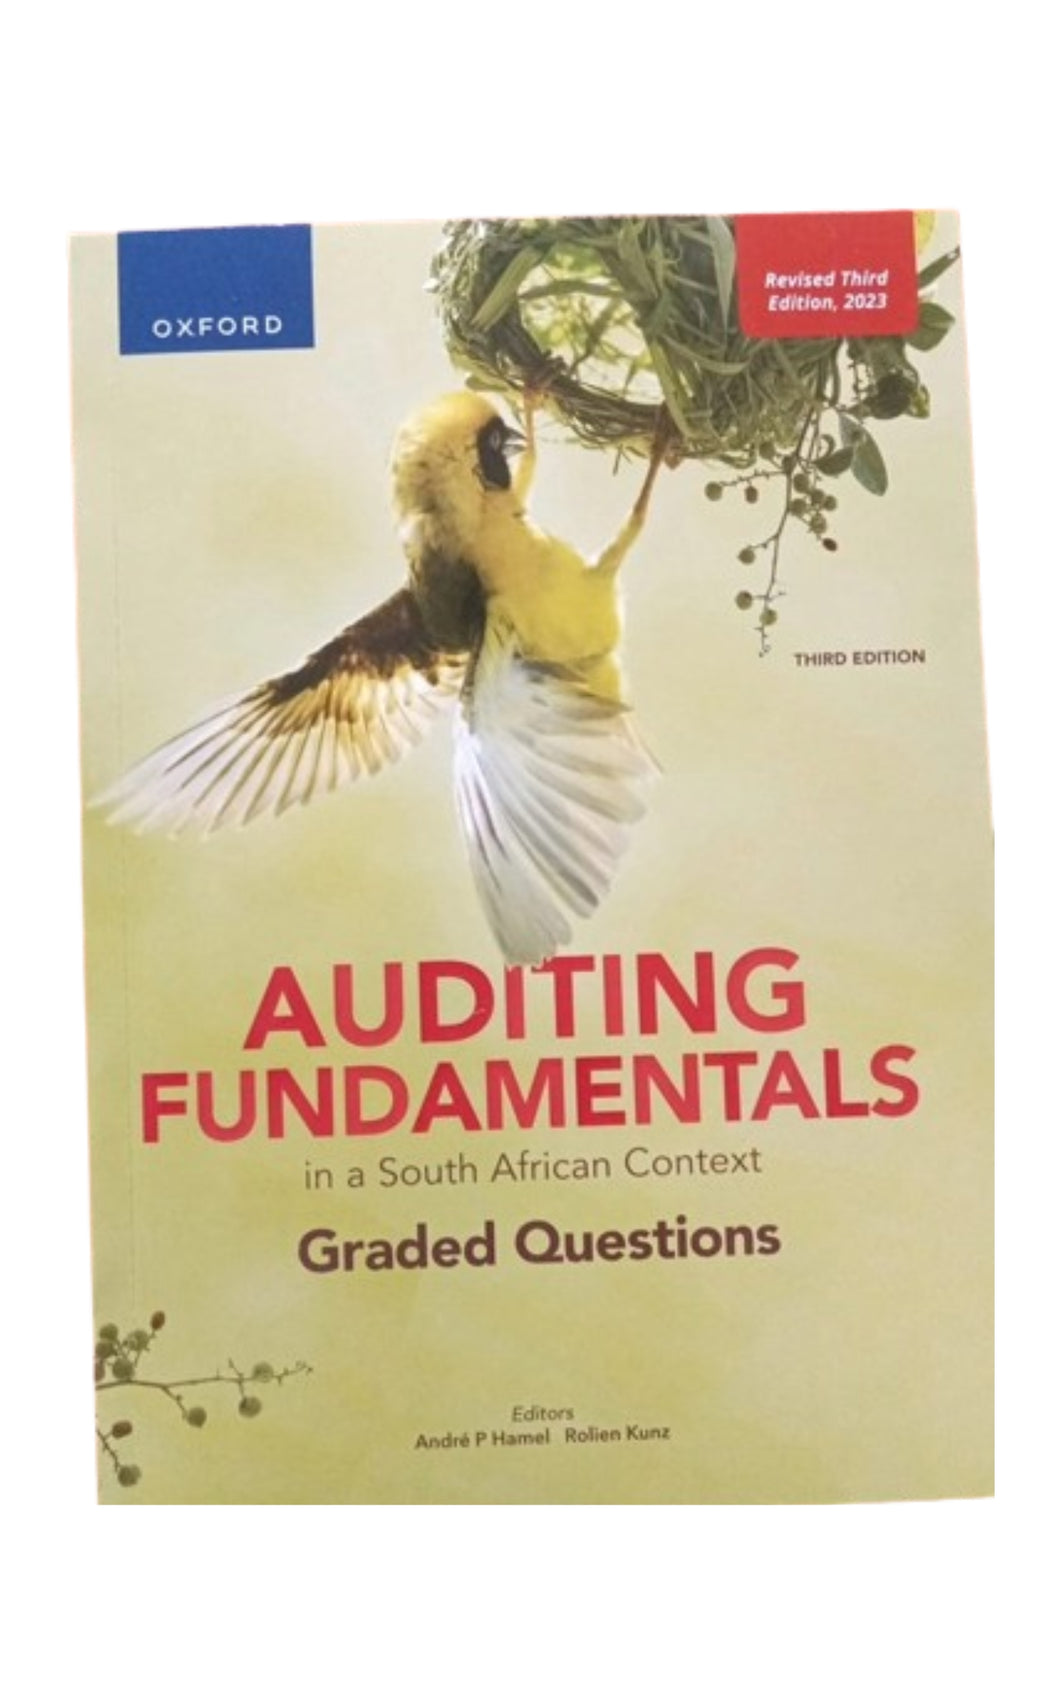 Auditing Fundamentals in a SA Context: Graded Questions 3rd Edition